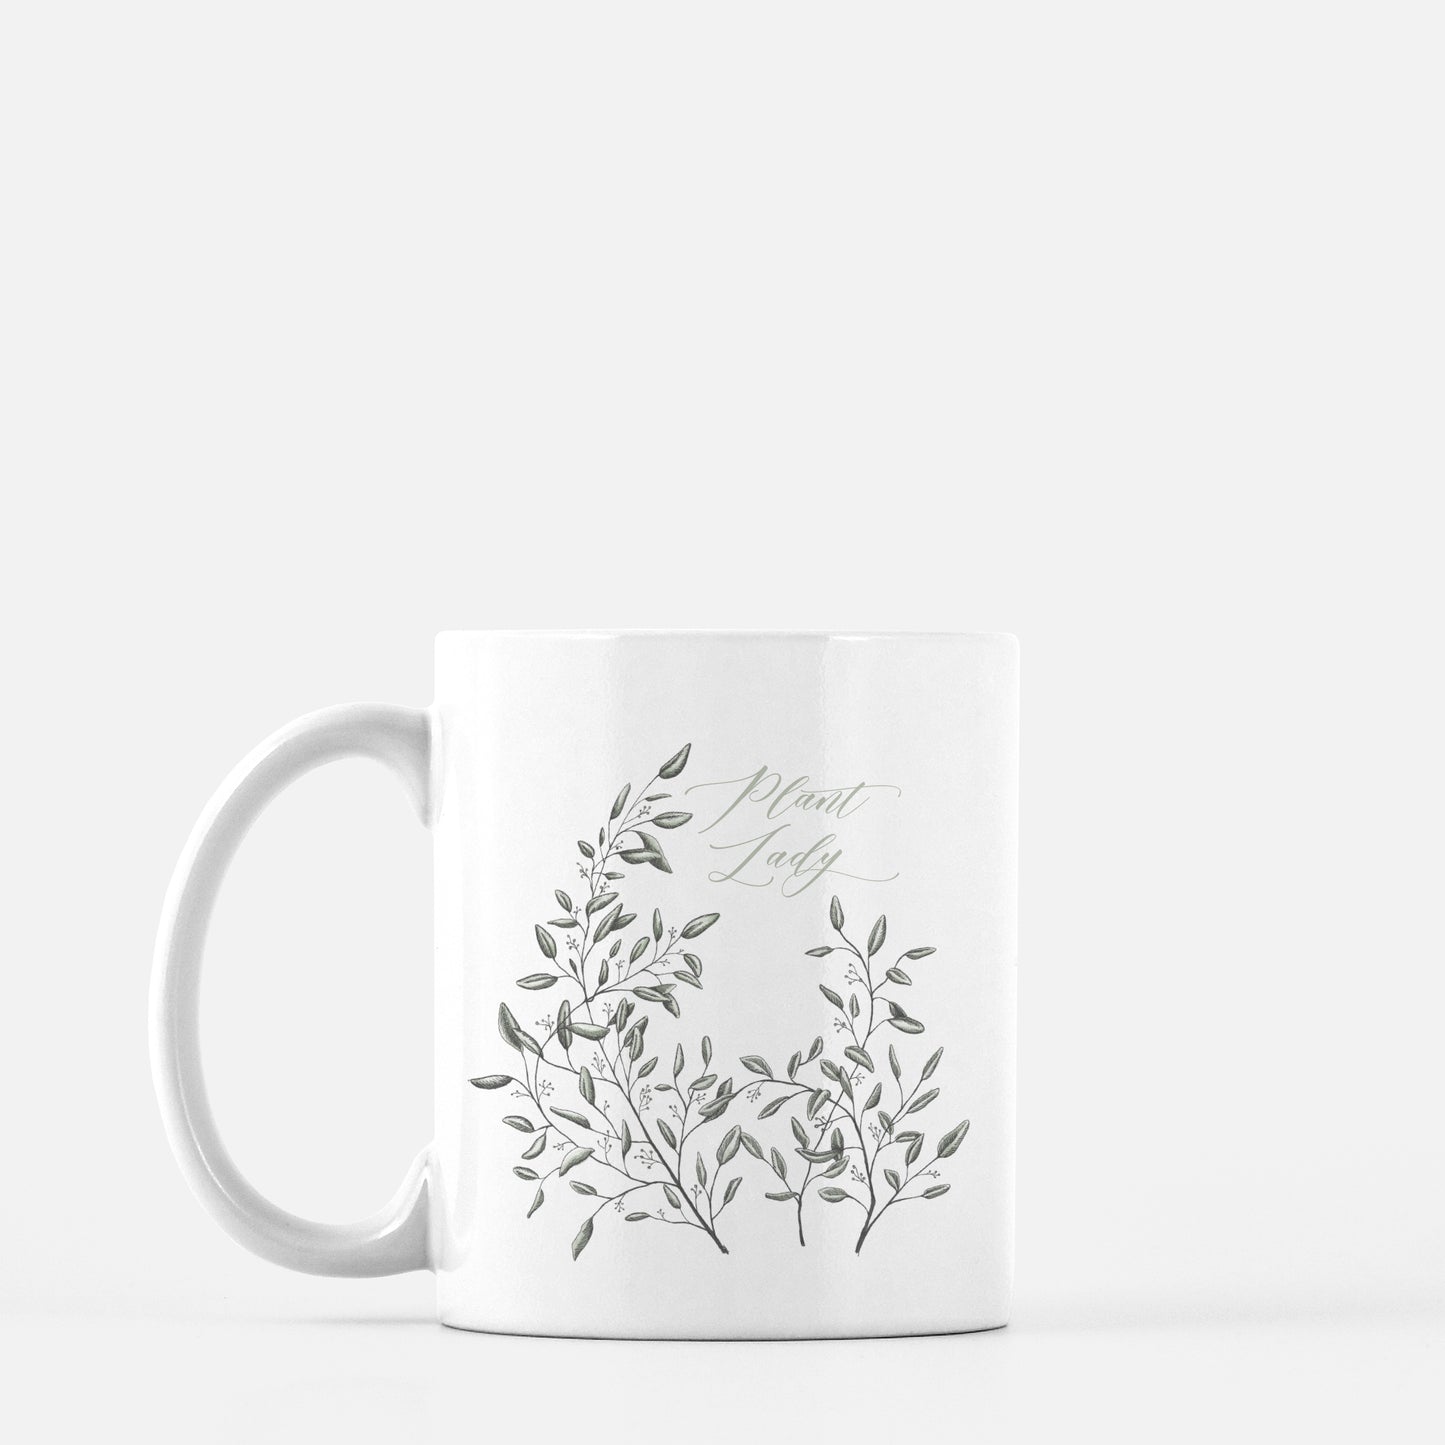 White ceramic mug with drawing of leafy greenery and words "Plant Lady" by Rust Belt Love